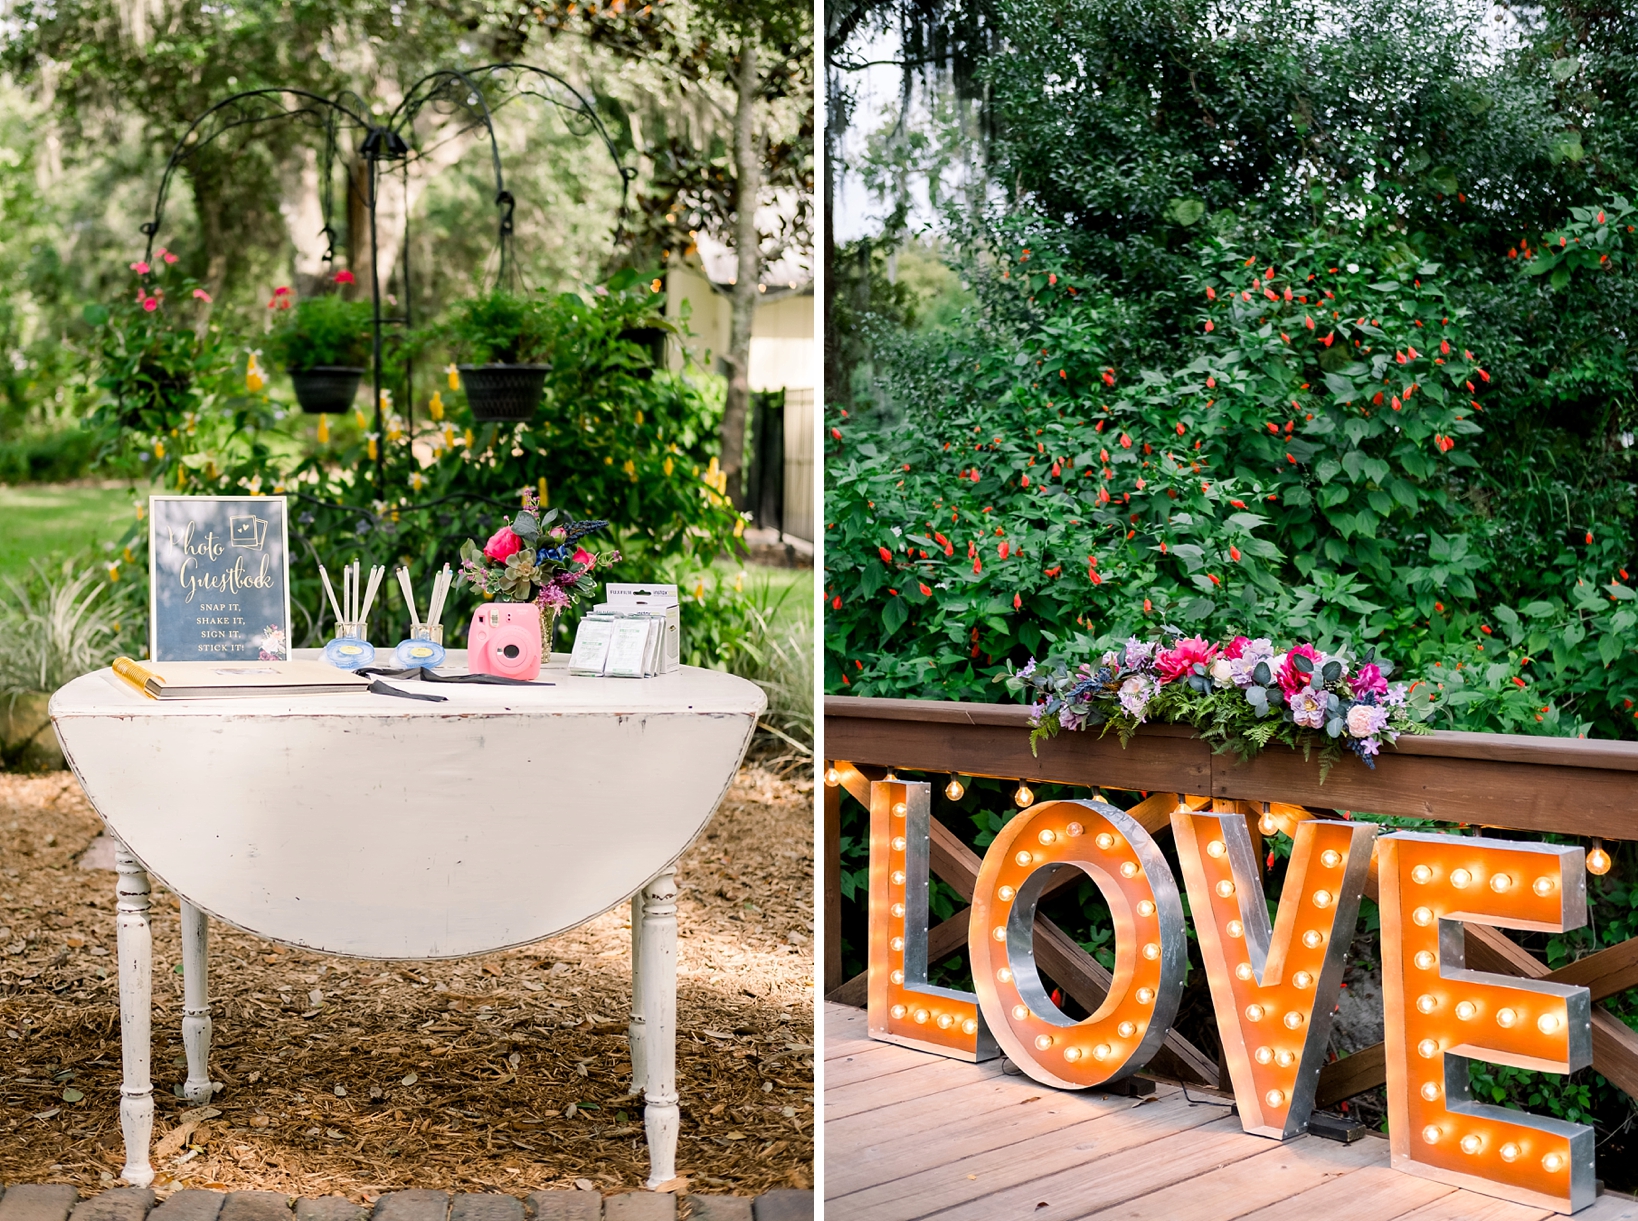 Reception details such as a guest sign in book and a Love sign with lights